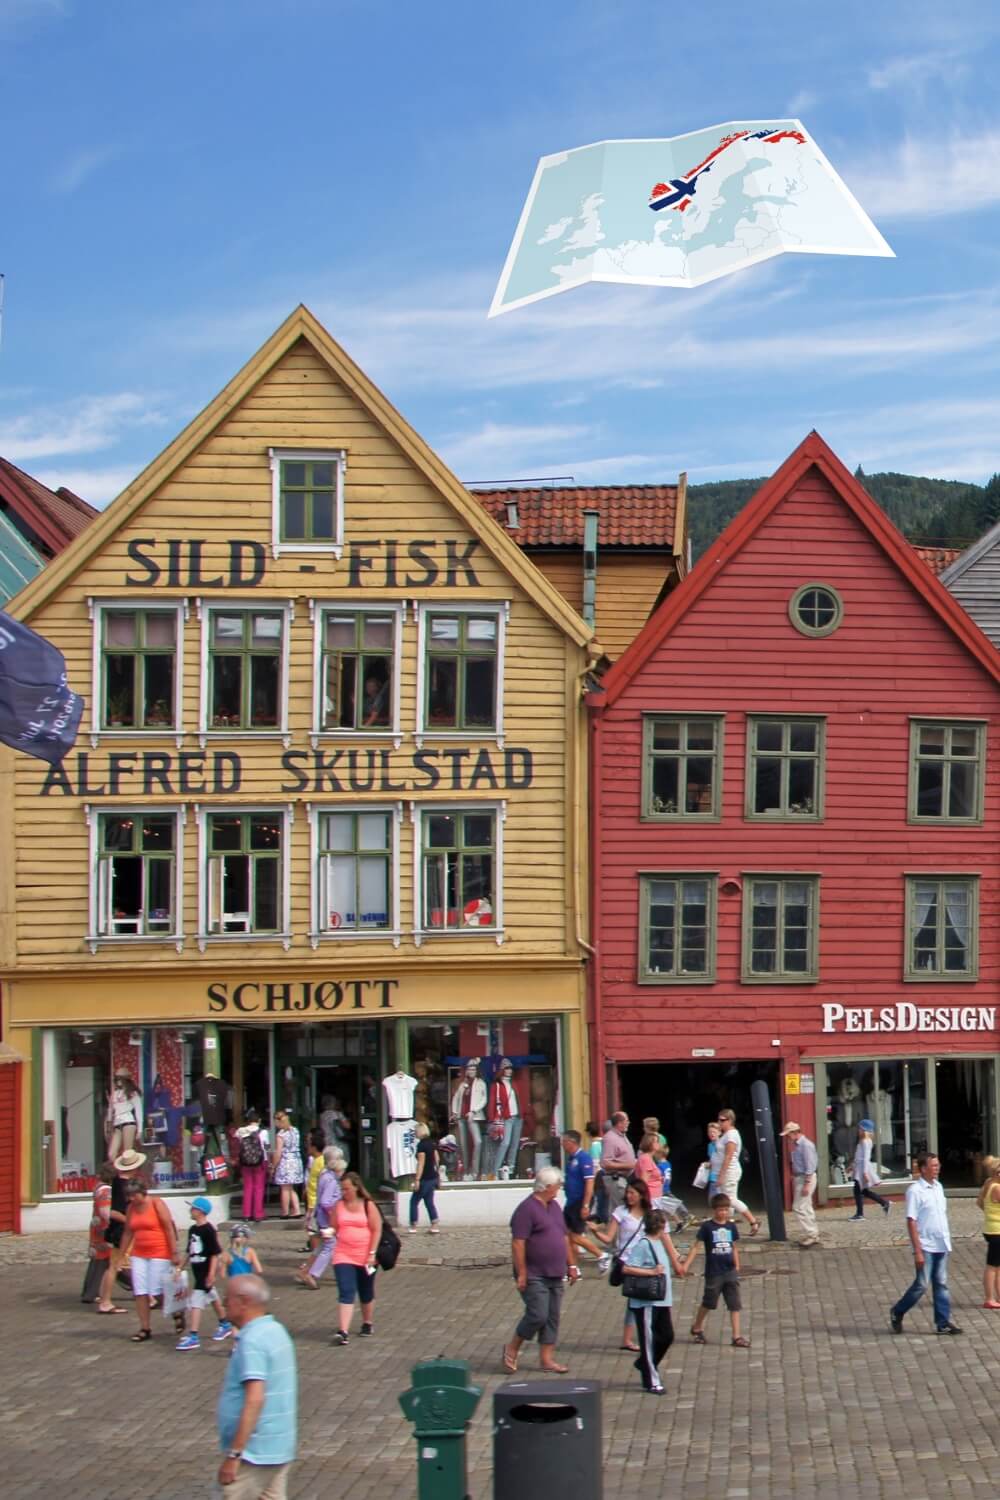 Job search: Norwegian harbour town with shops